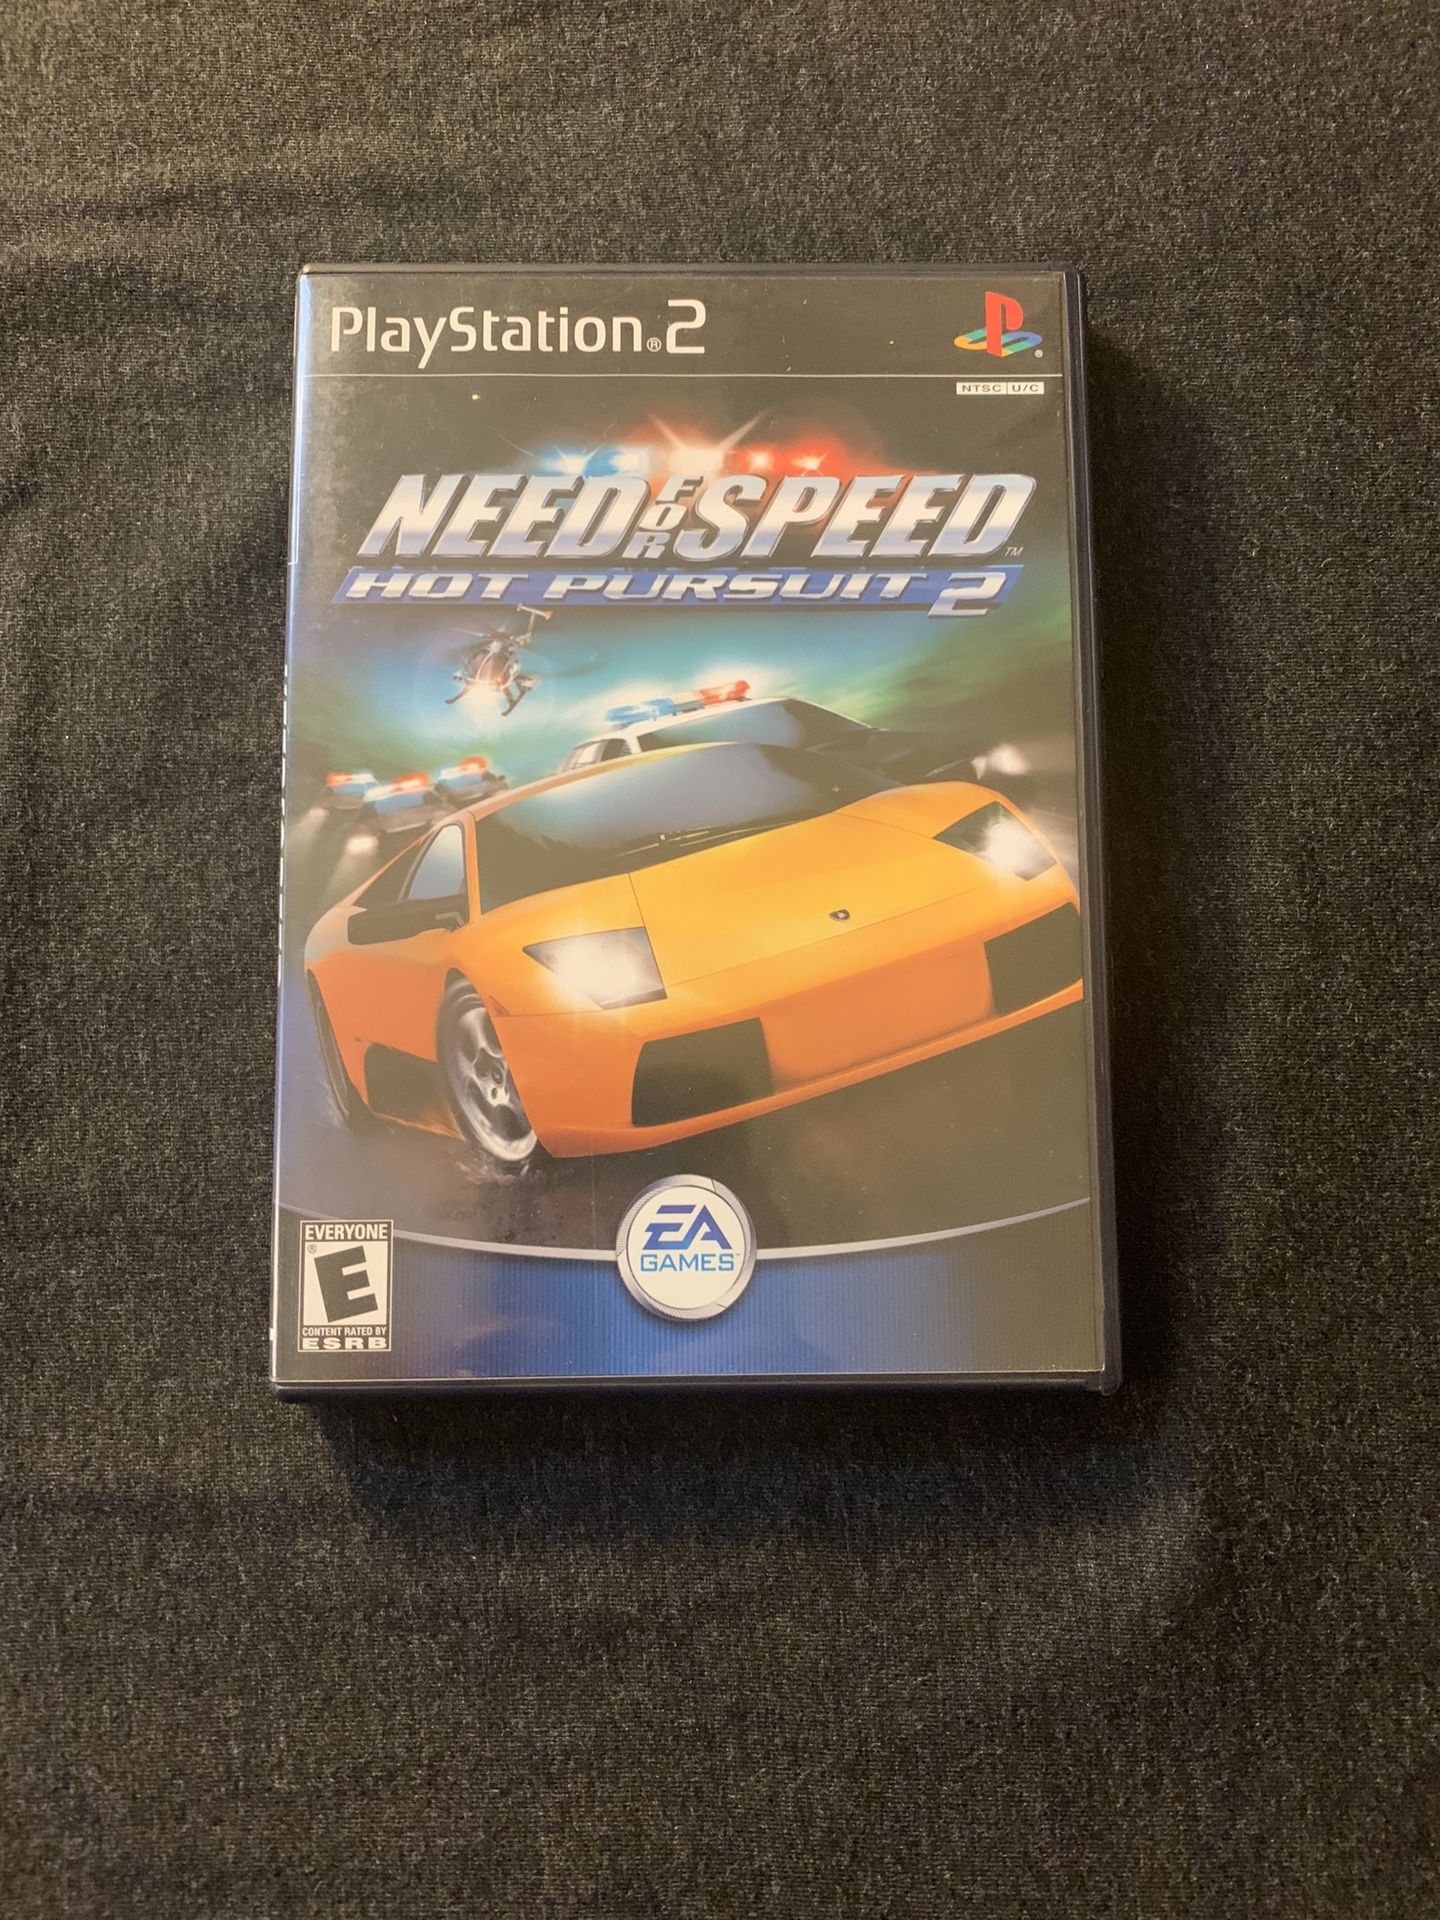 PlayStation 2 game. Need for speed hot pursuit 2.